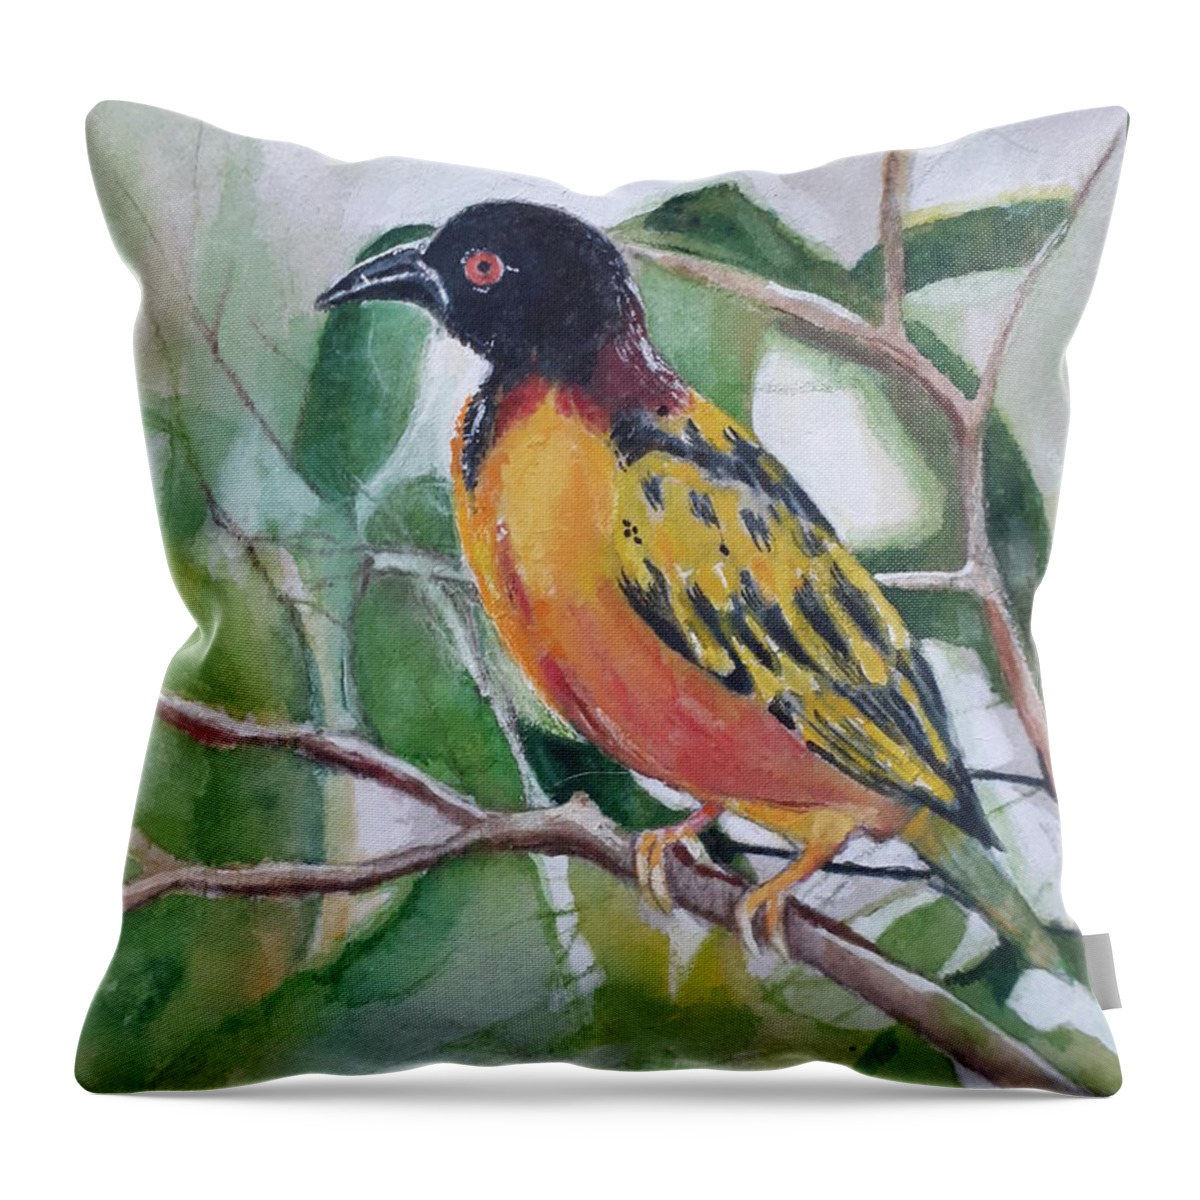 Watercolor Pencils Throw Pillow featuring the painting Bird in black and yellow by Carolina Prieto Moreno